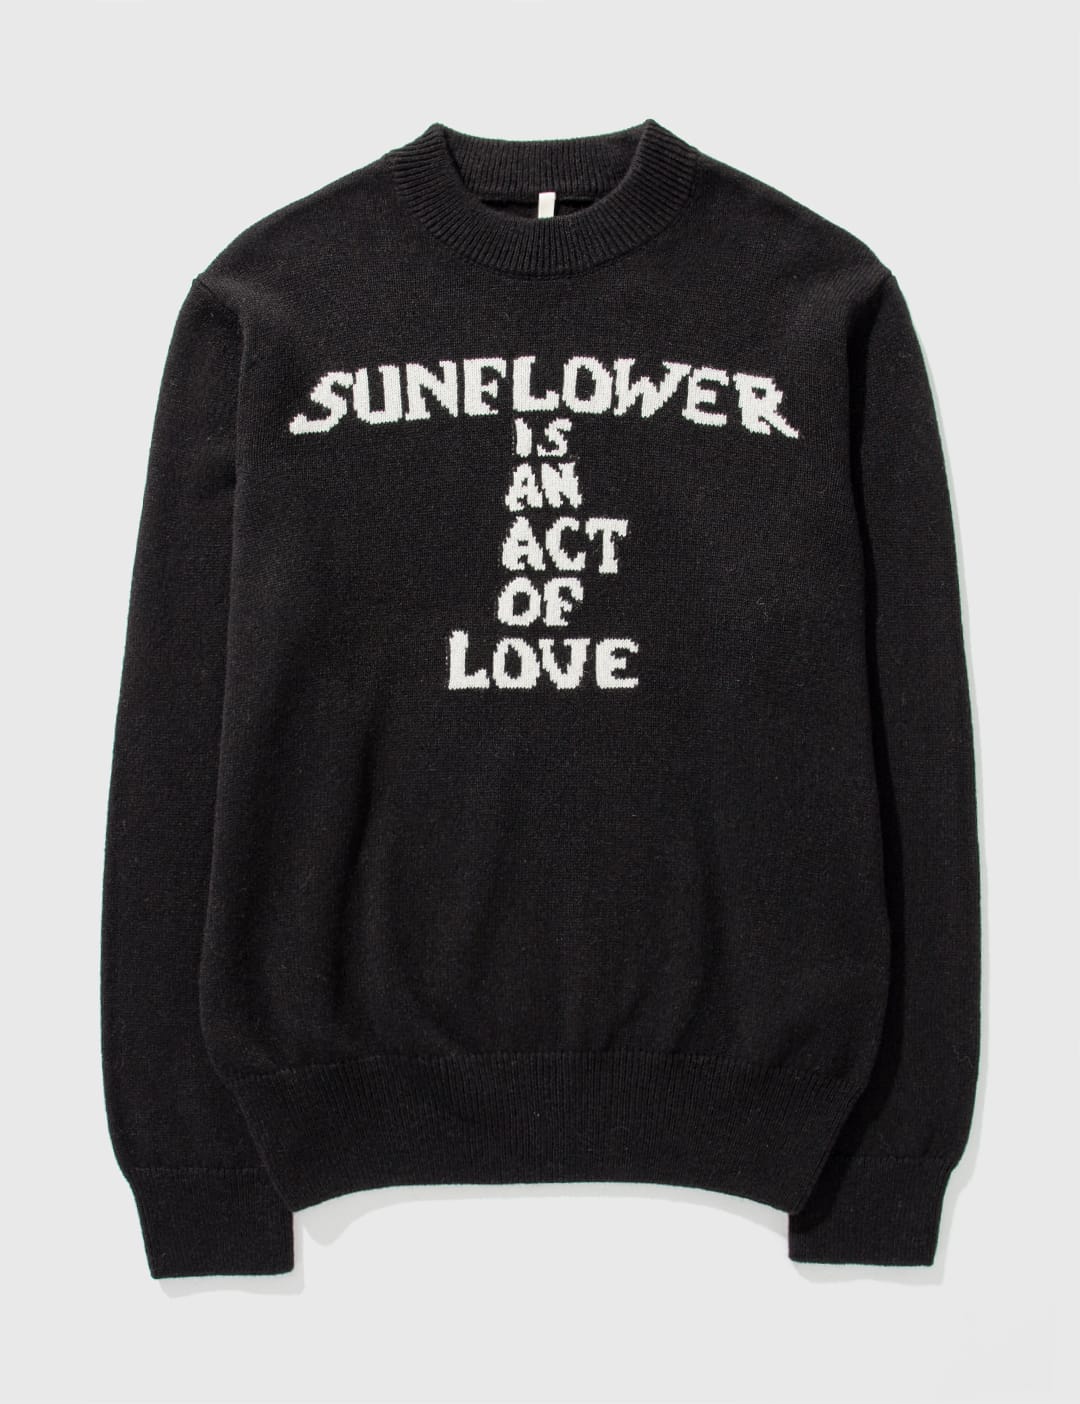 Sunflower - Moon Love Knit | HBX - Globally Curated Fashion and 